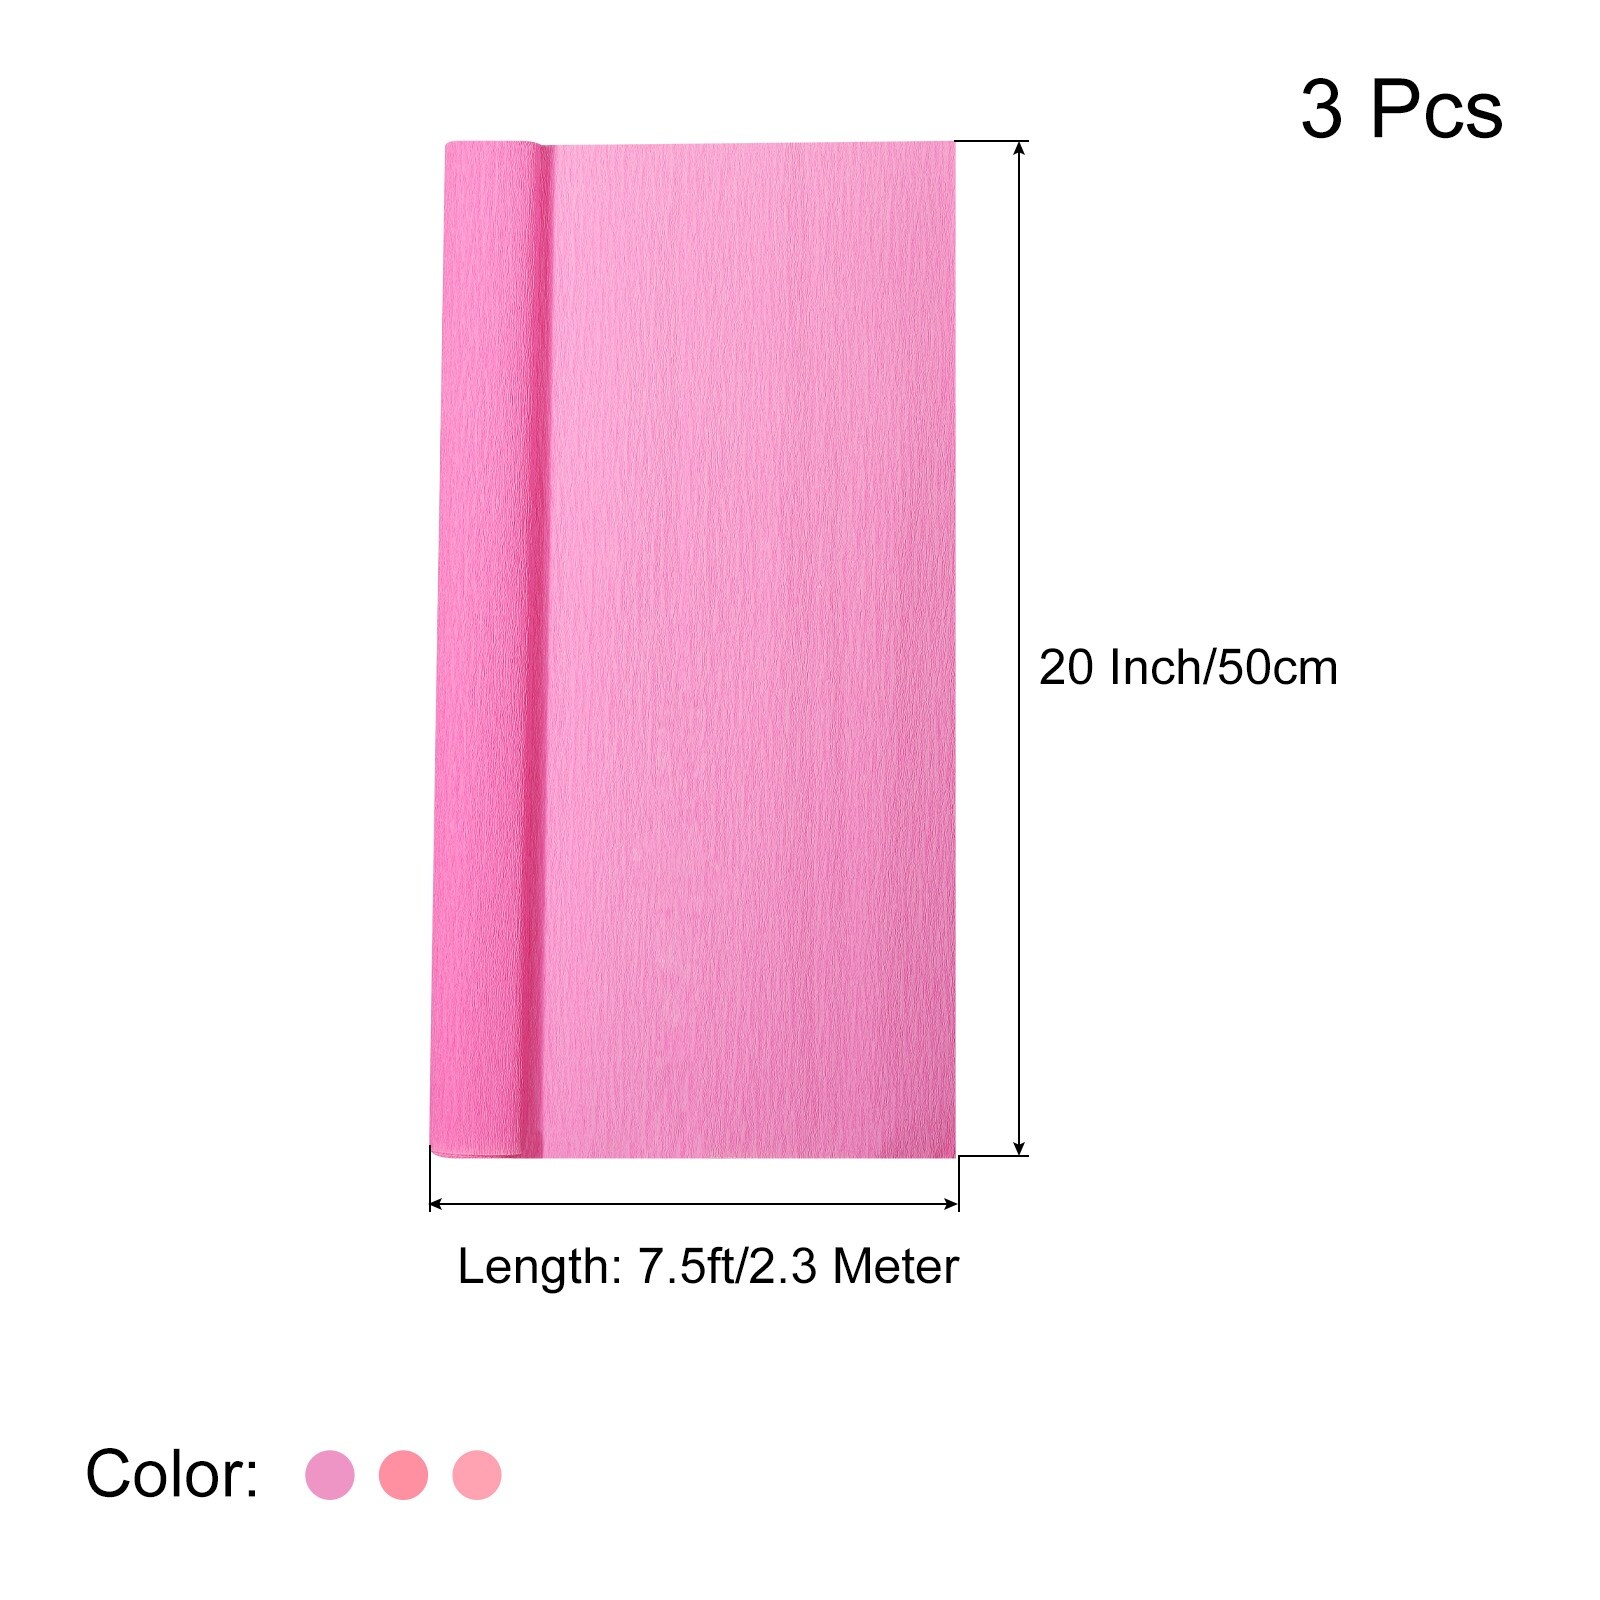 Crepe Paper Roll Crepe Paper Decoration 7.5ft Long 20 Inch Wide, Hot Pink